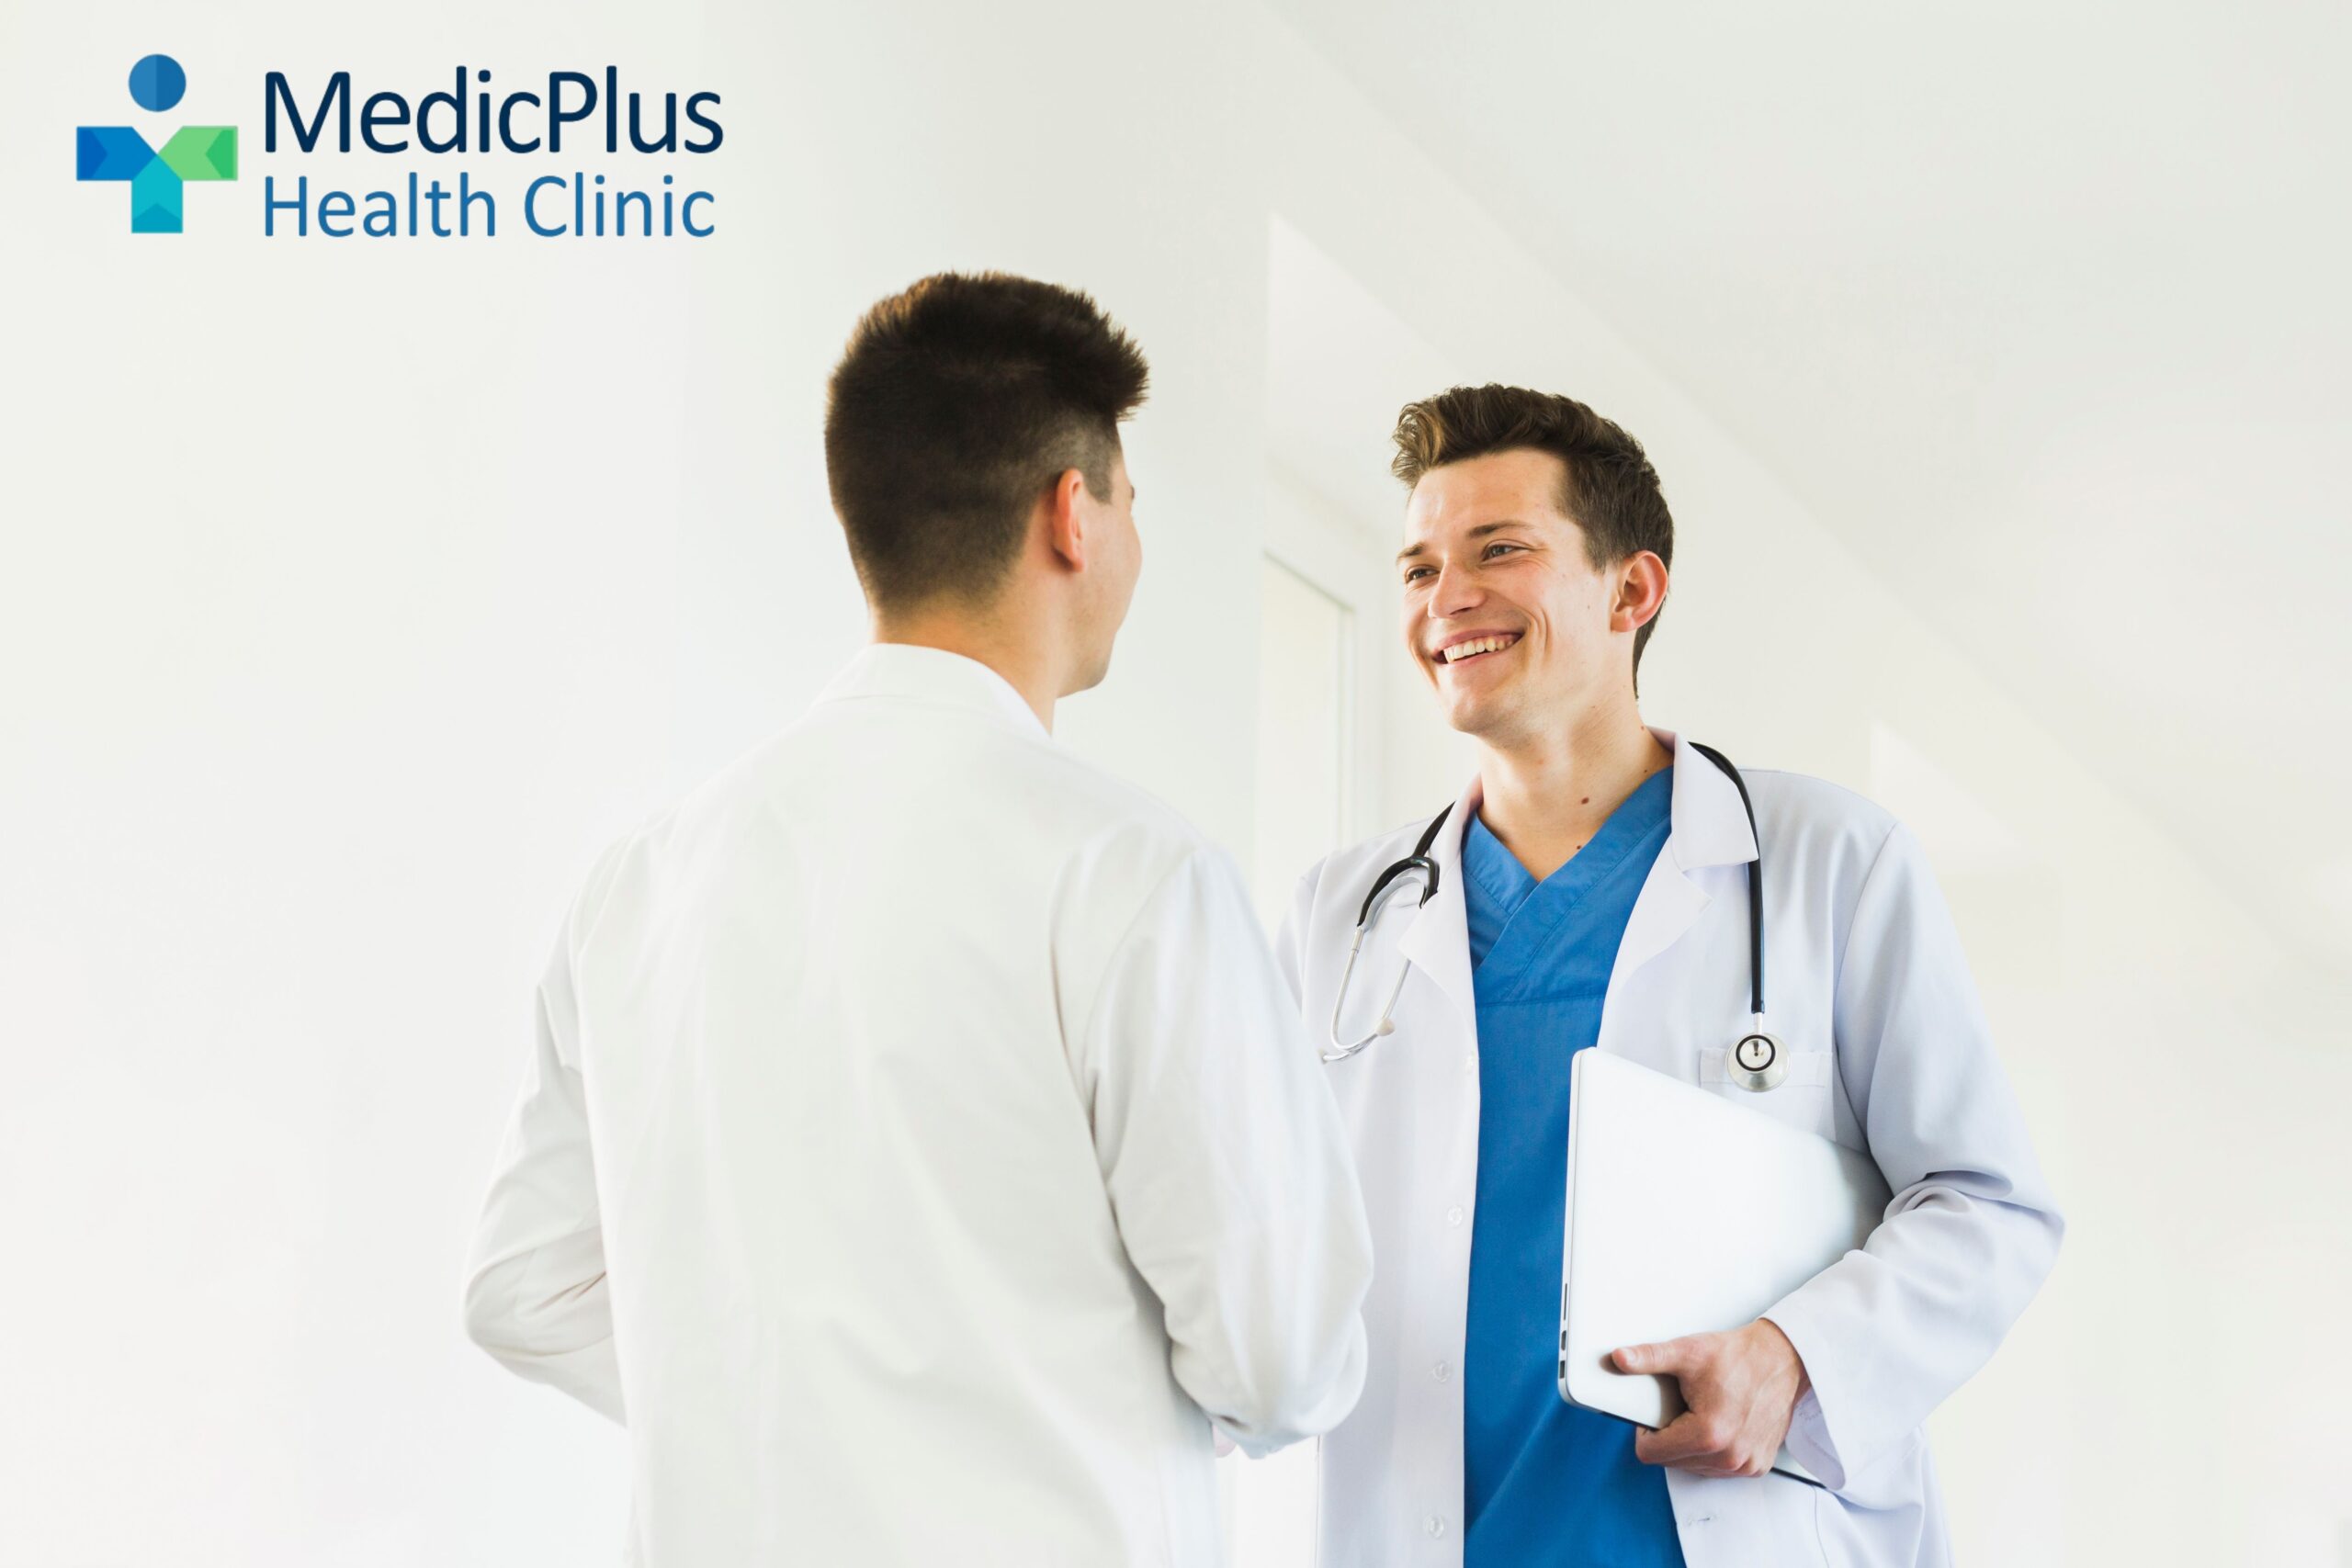 Men’s Health at MedicPlus: Benefits and Services